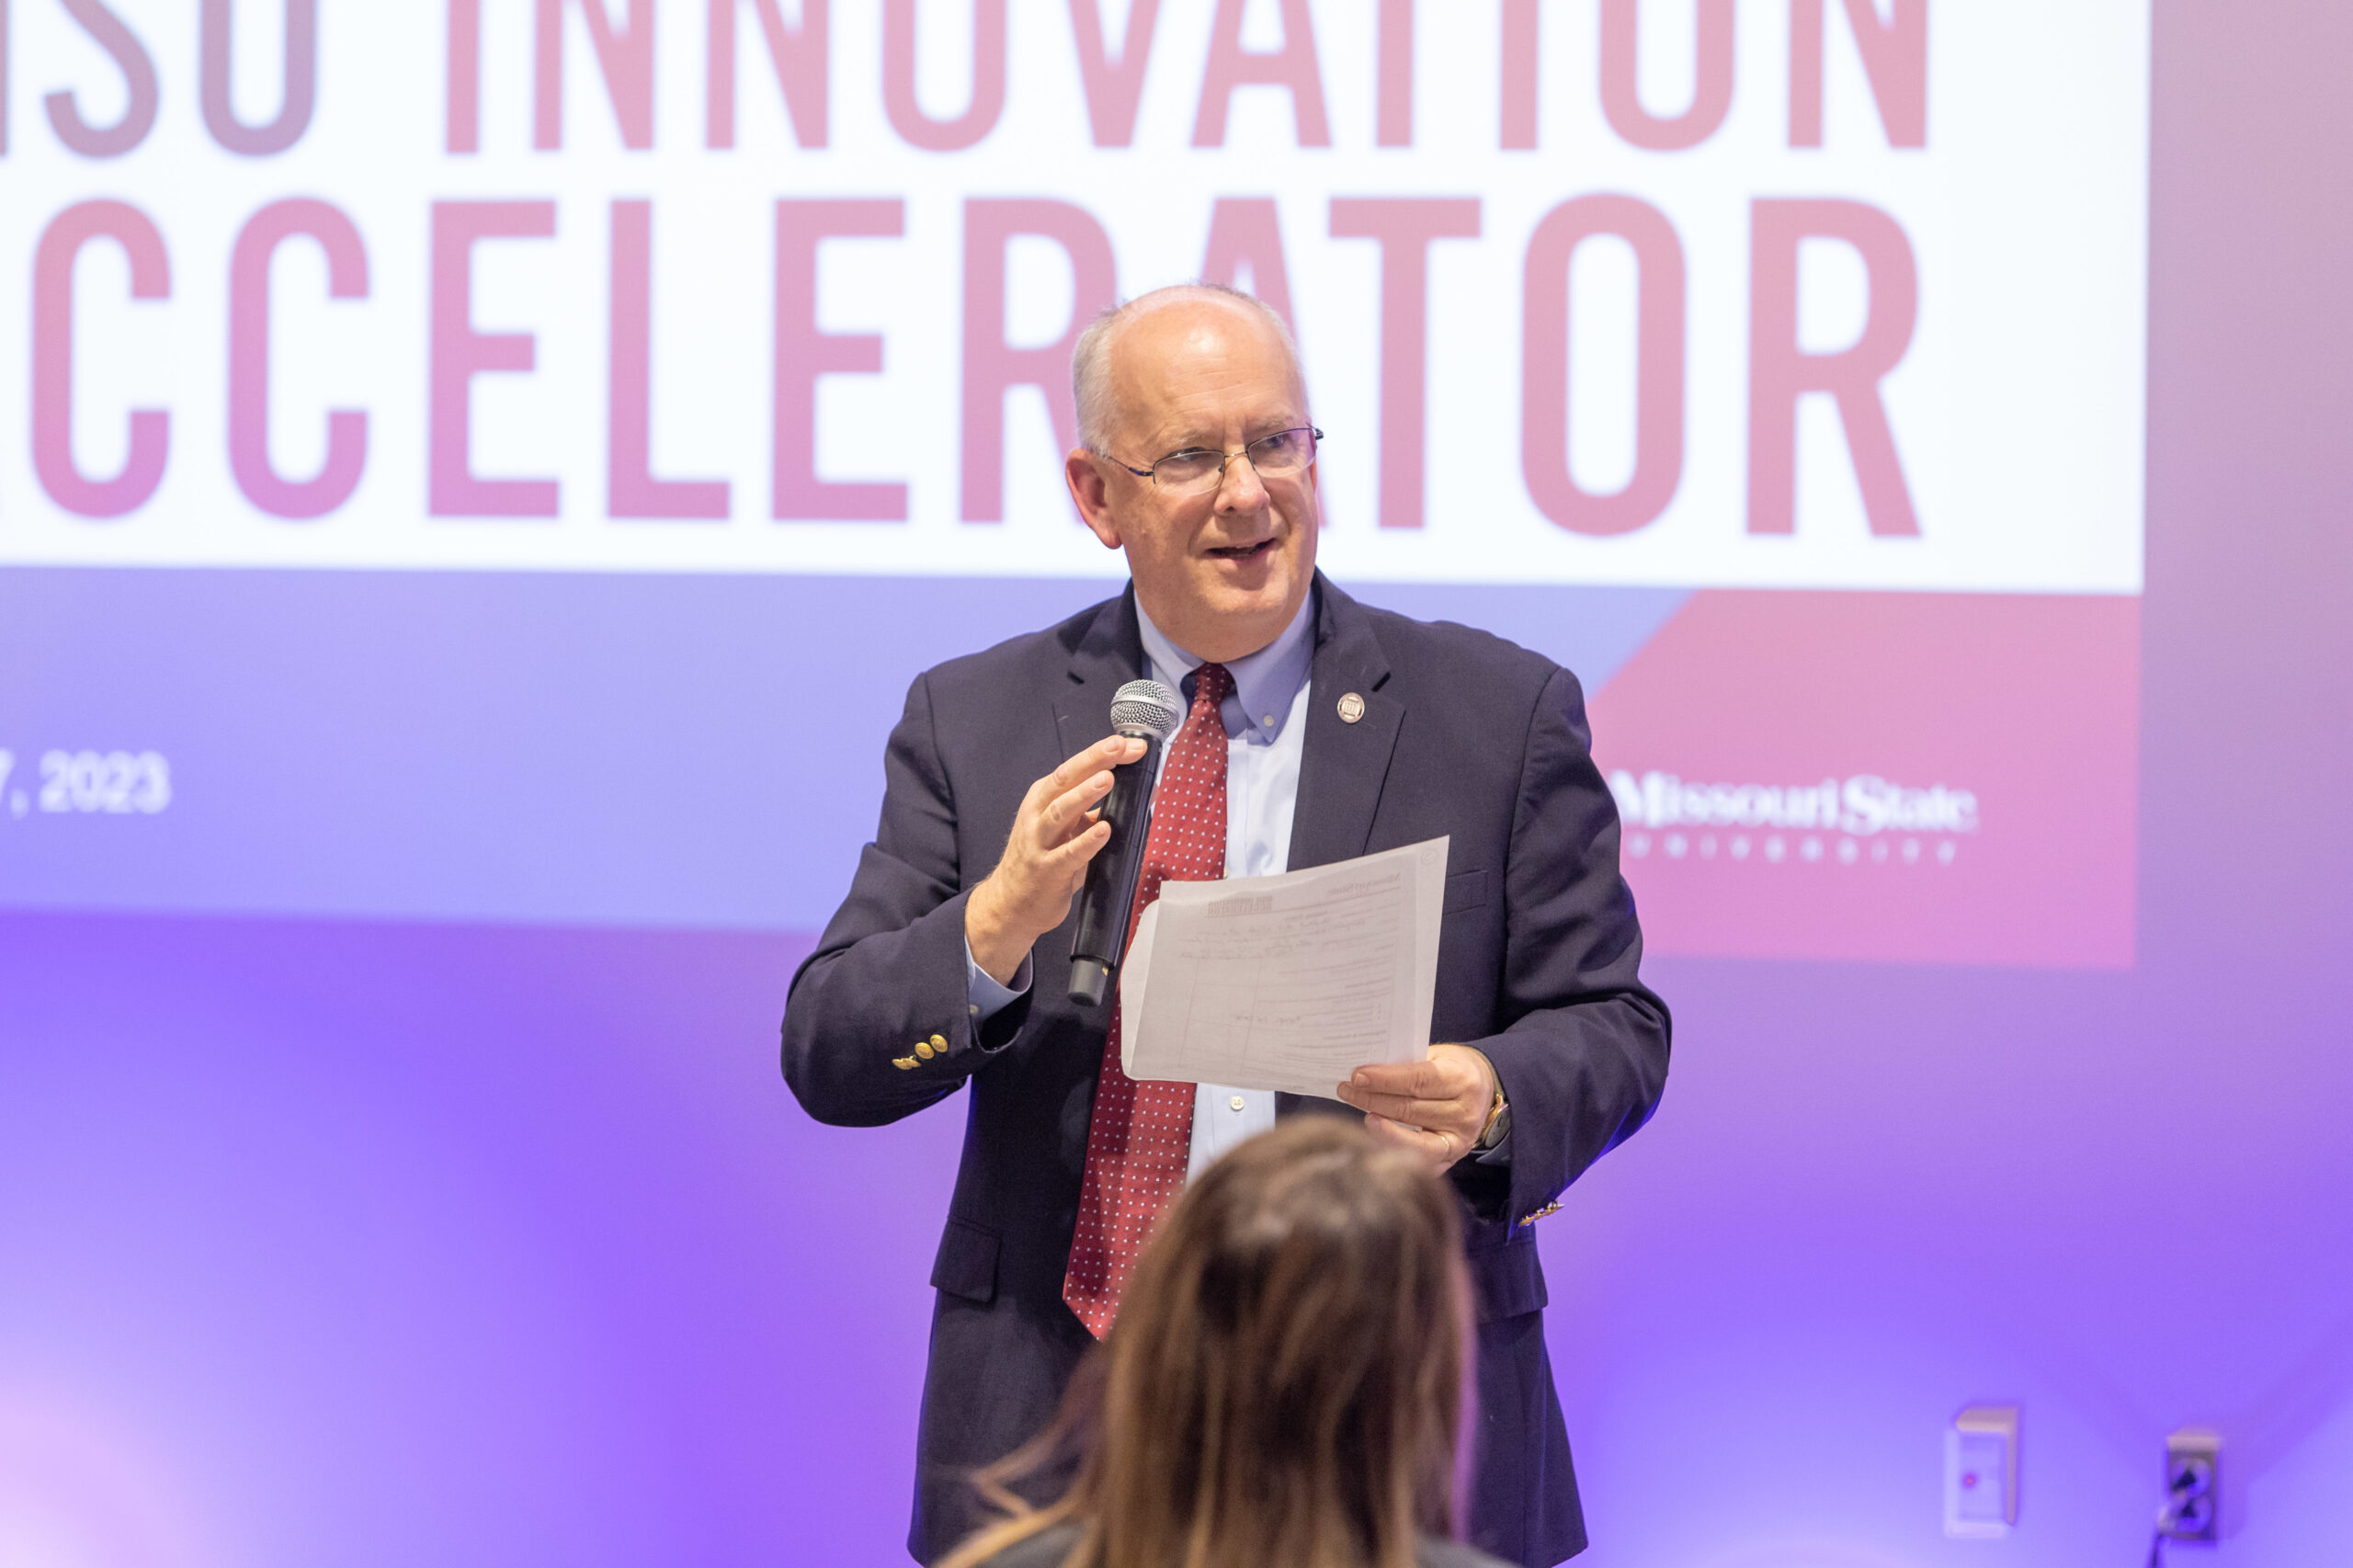 President Smart presents at first annual Innovation Accelerator